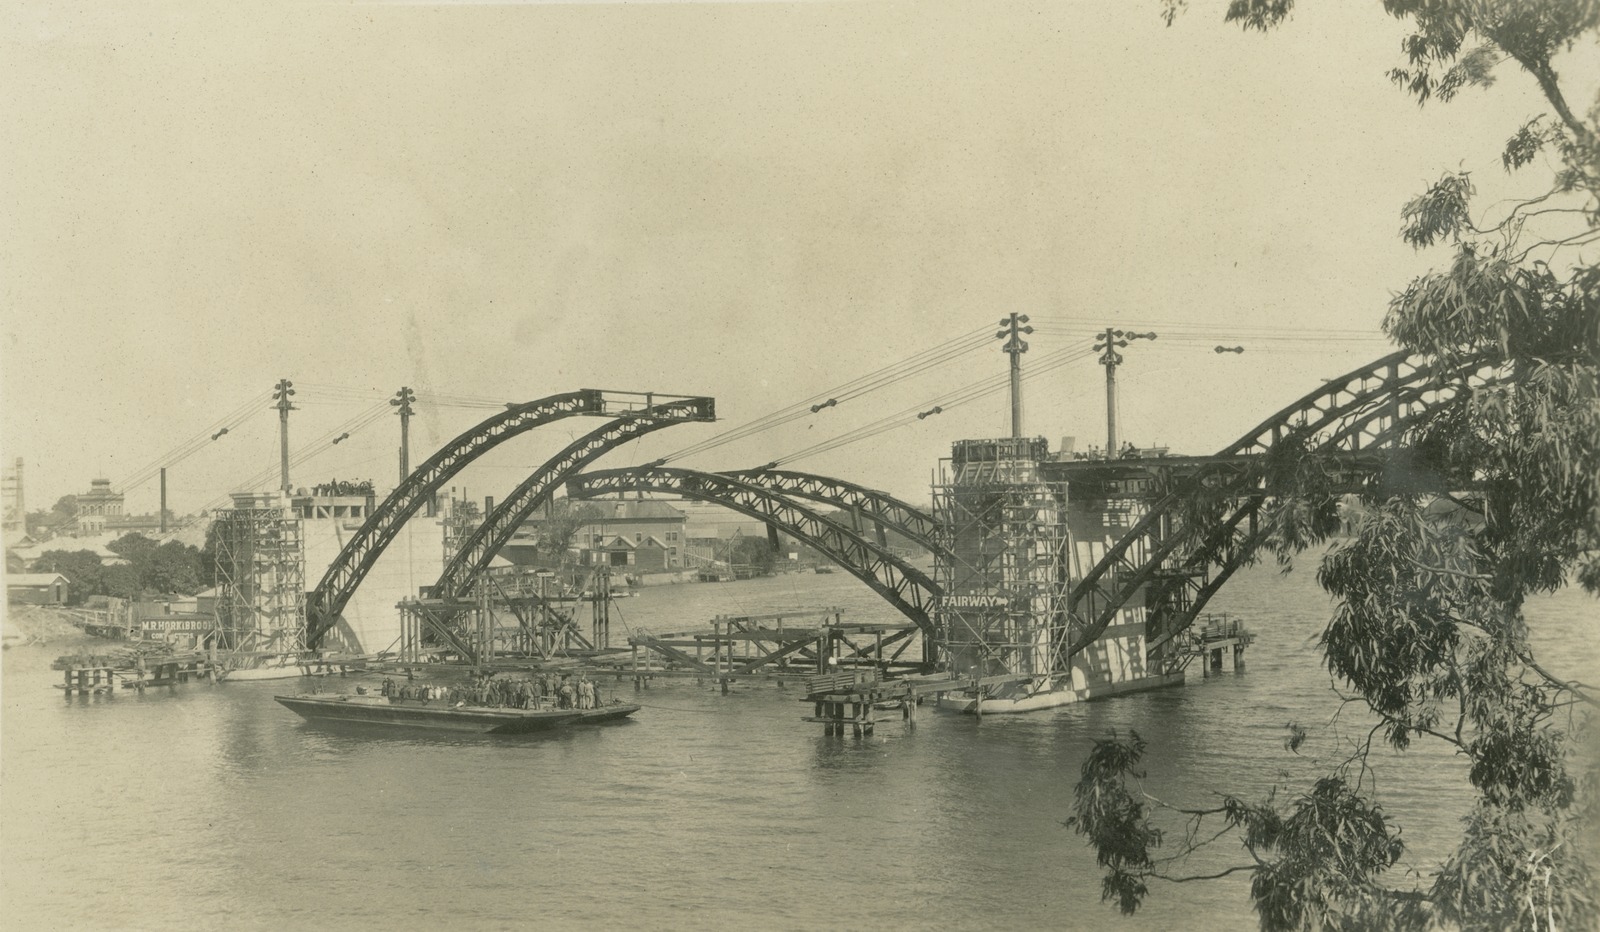 William Jolly Bridge under construction, with the steel archways being suspended and slotted into place by cables